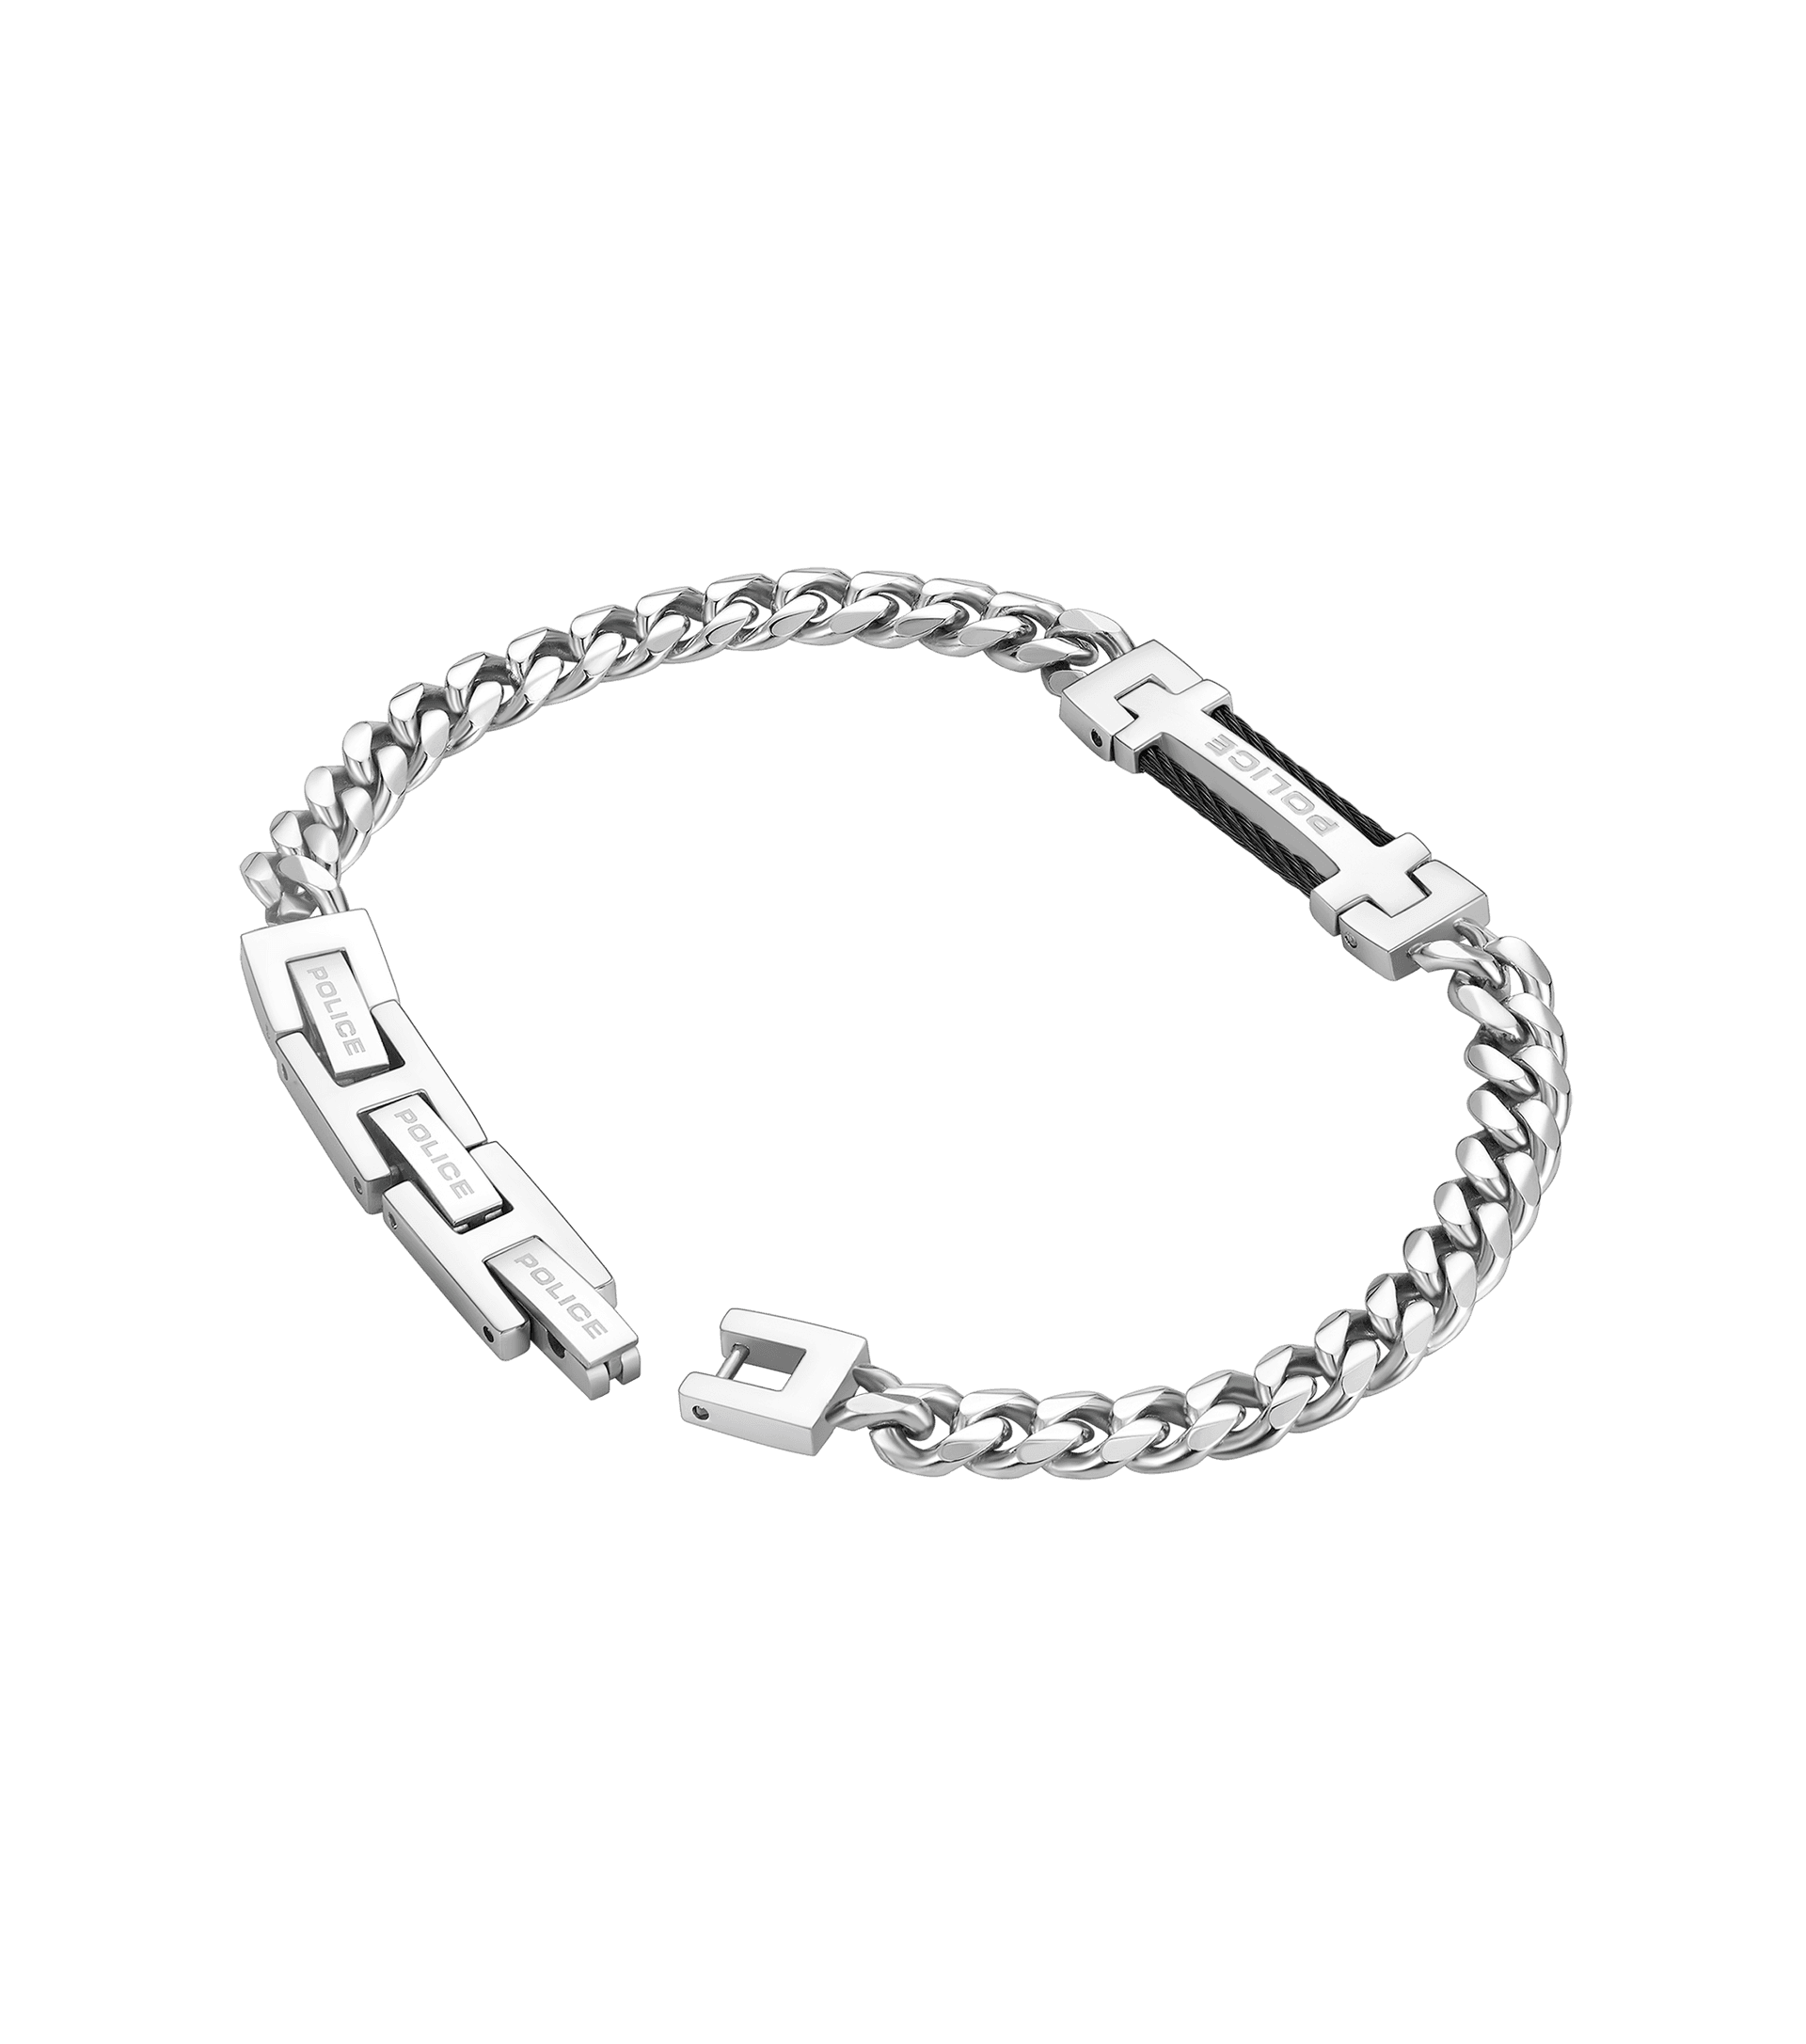 Police jewels - Carb II Bracelet By Police For Men PEAGB0008701